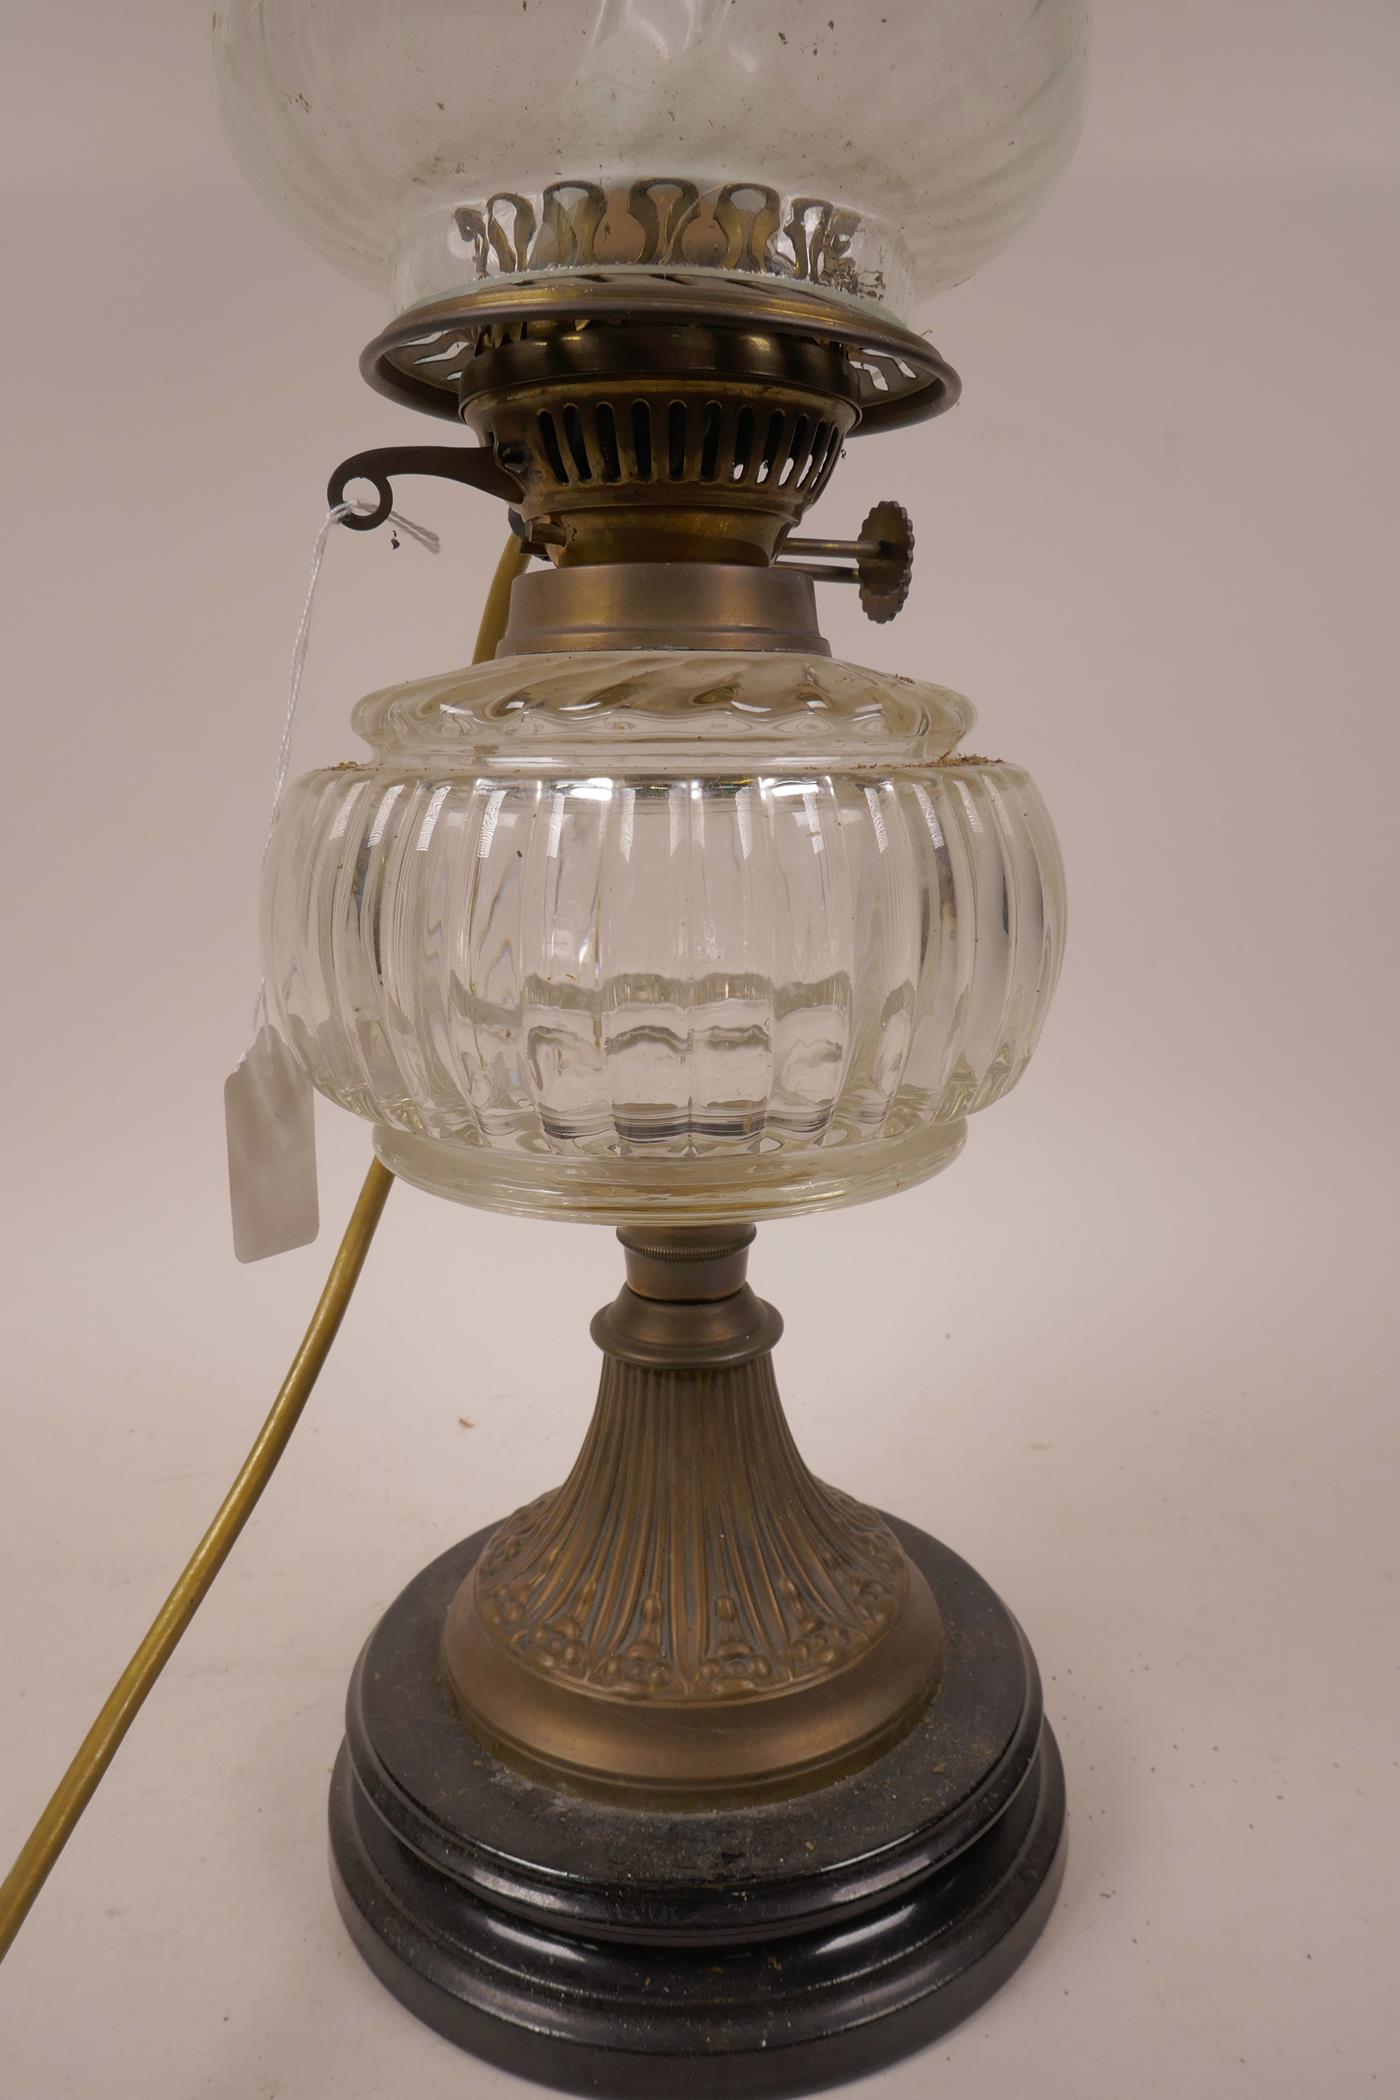 A C19th glass and brass oil lamp with glass shade and font on a classical brass and wood column - Image 2 of 3